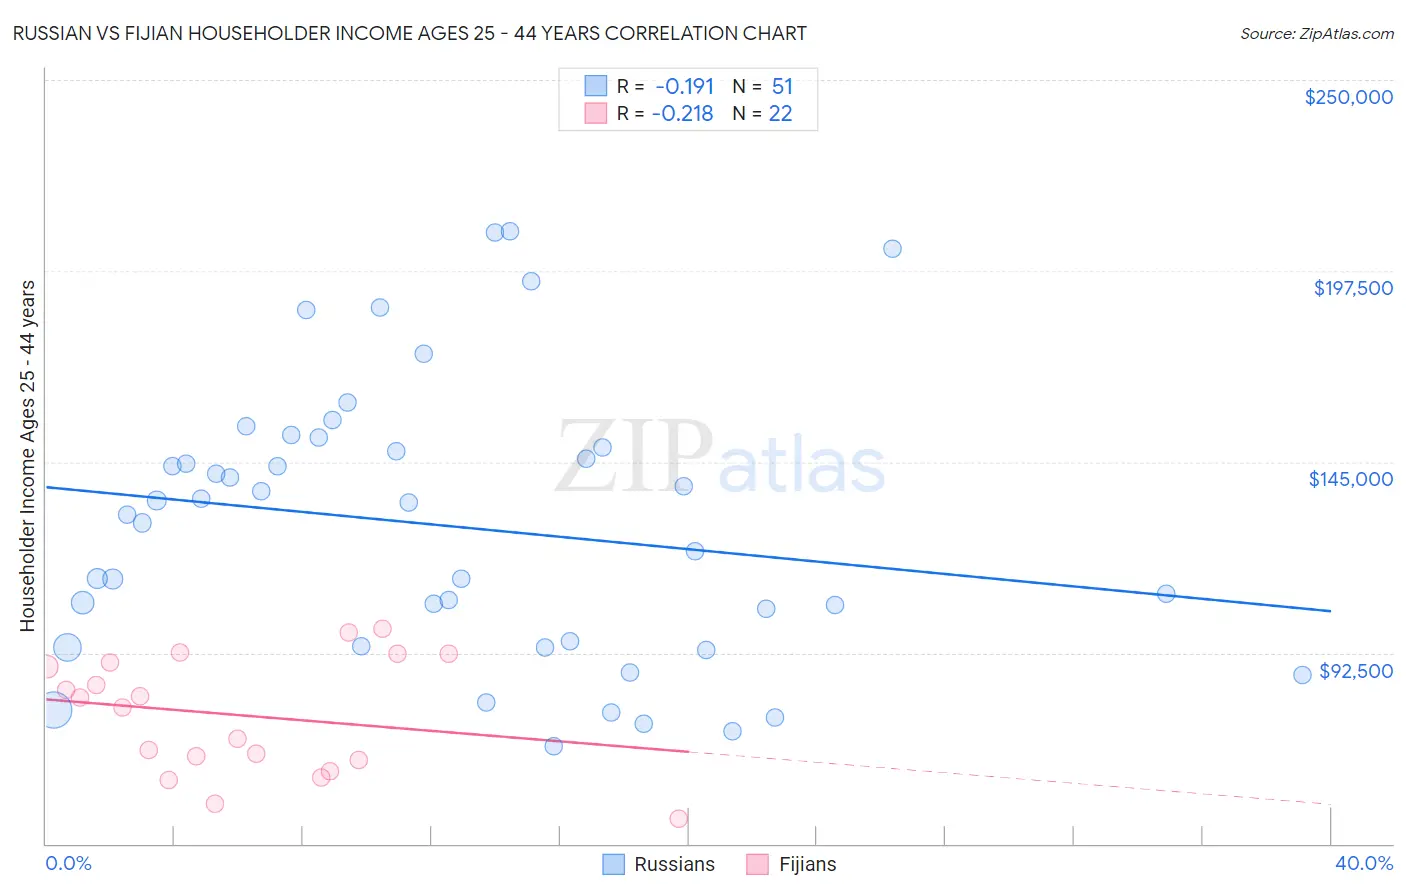 Russian vs Fijian Householder Income Ages 25 - 44 years